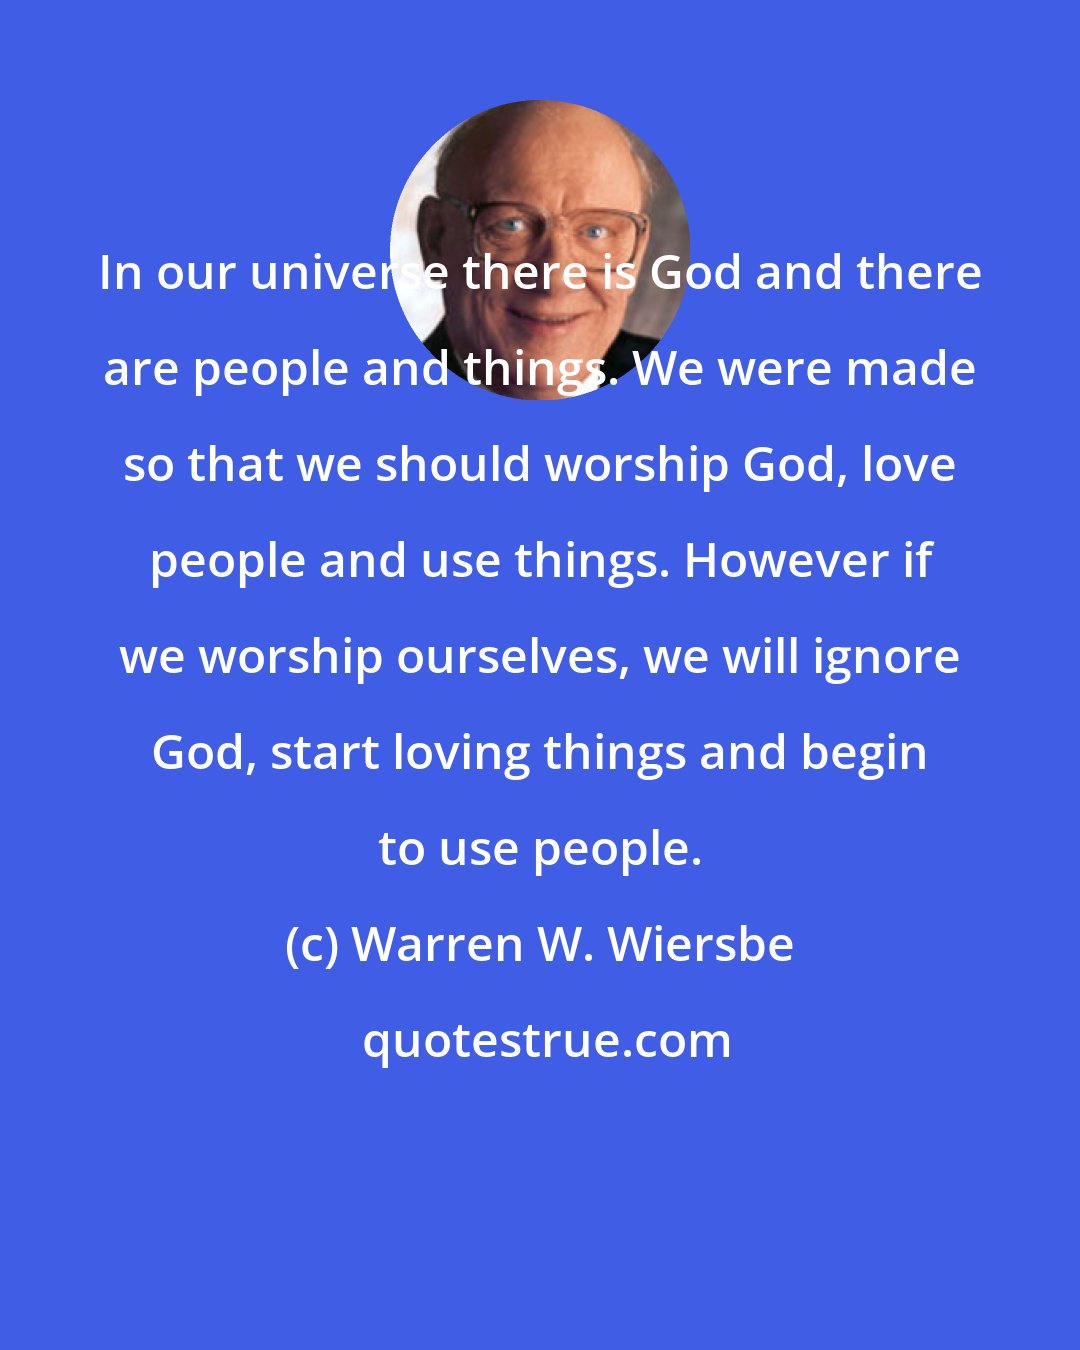 Warren W. Wiersbe: In our universe there is God and there are people and things. We were made so that we should worship God, love people and use things. However if we worship ourselves, we will ignore God, start loving things and begin to use people.